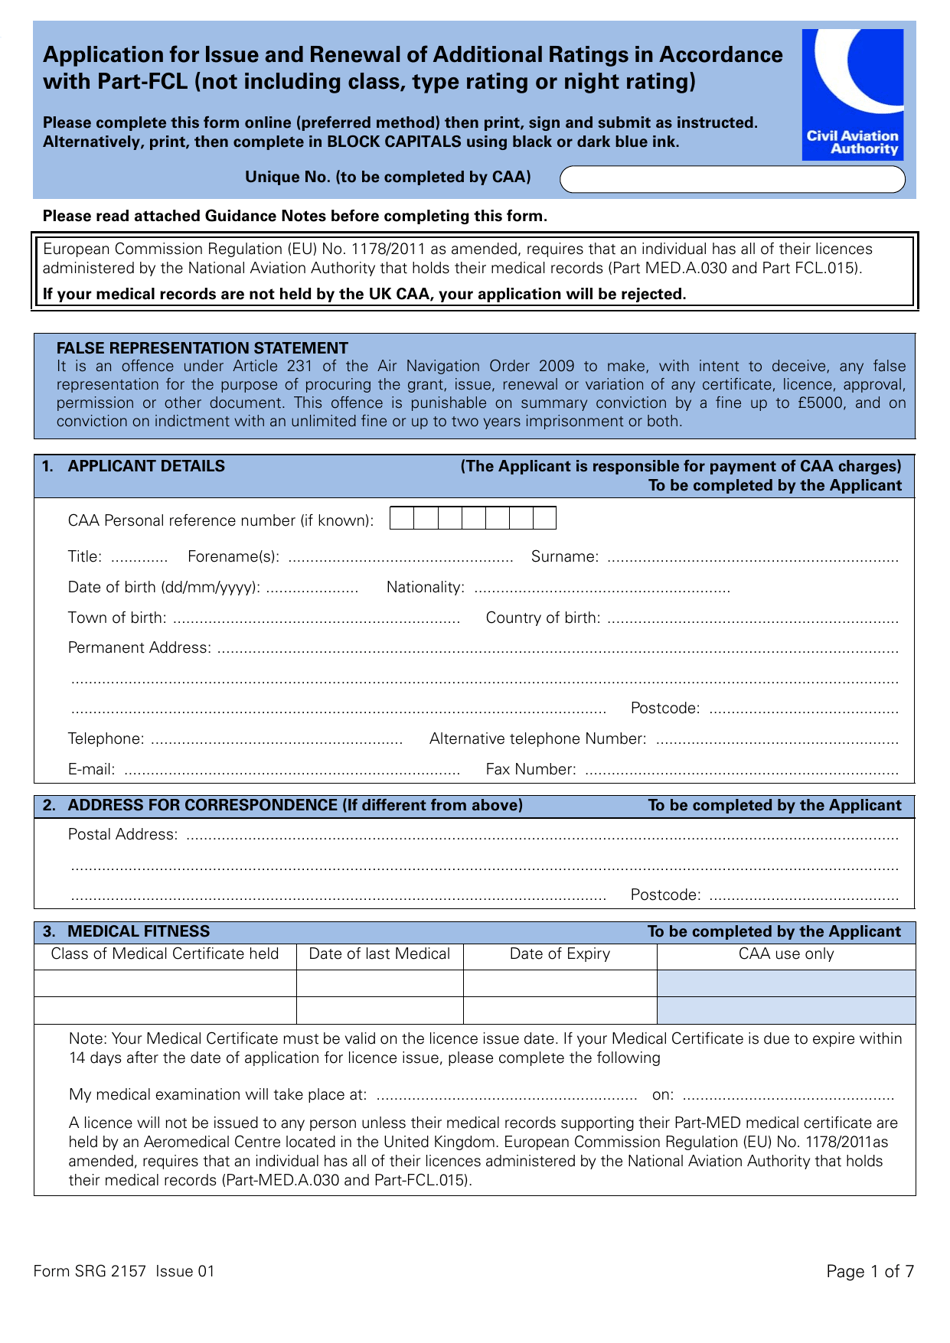 Form SRG2157 Application for Issue and Renewal of Additional Ratings in Accordance With Part-Fcl (Not Including Class, Type Rating or Night Rating) - United Kingdom, Page 1